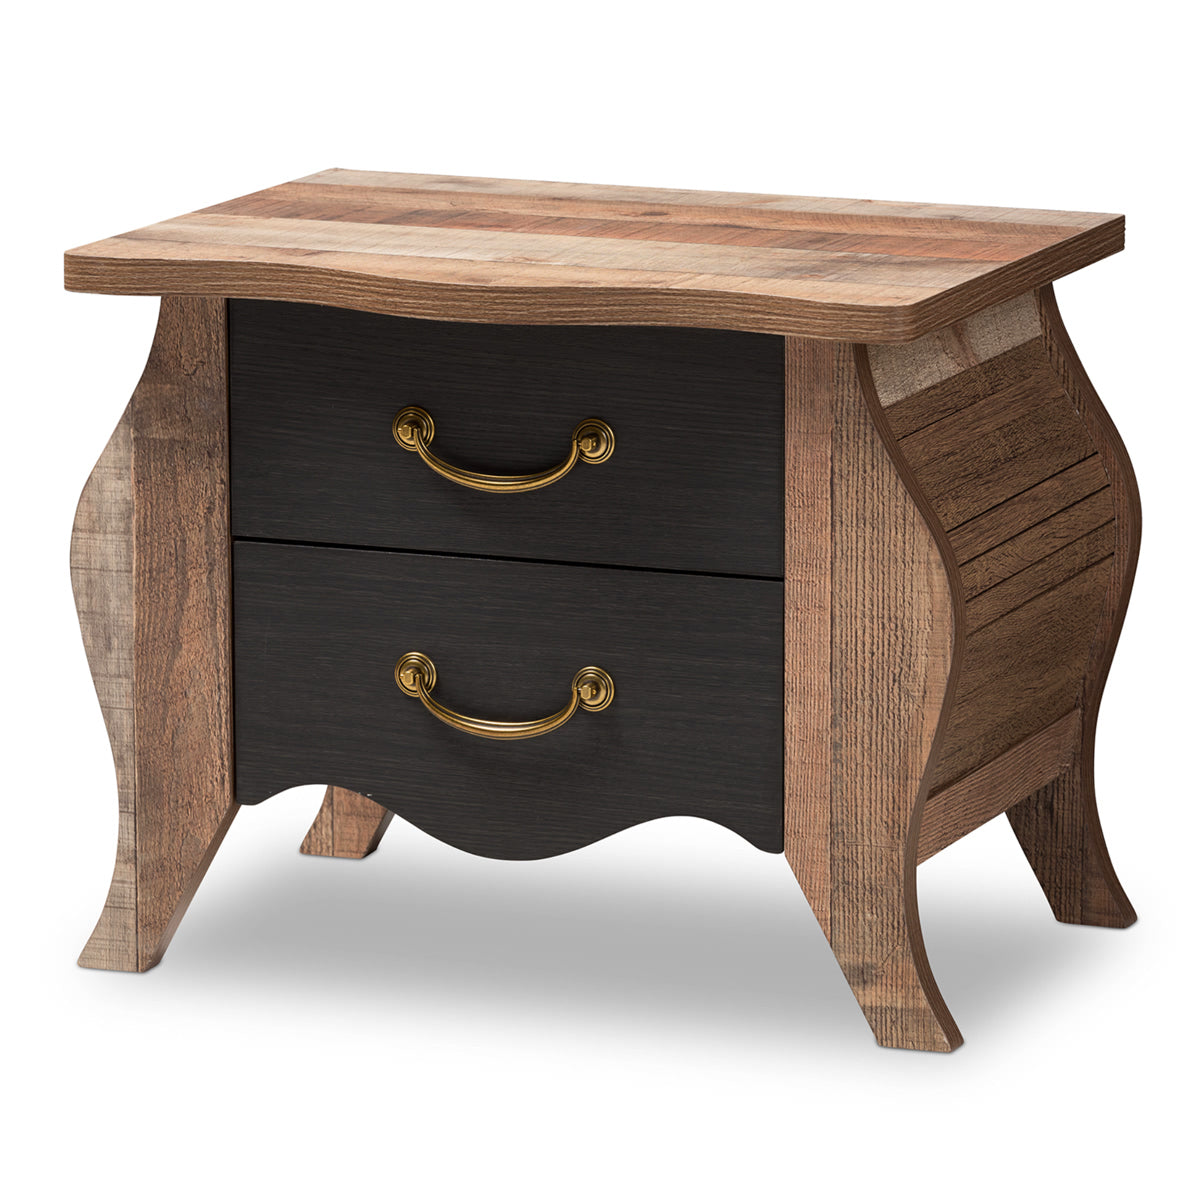 Baxton Studio Romilly Country Cottage Farmhouse Black and Oak-Finished Wood 2-Drawer Nightstand Baxton Studio-nightstands-Minimal And Modern - 1